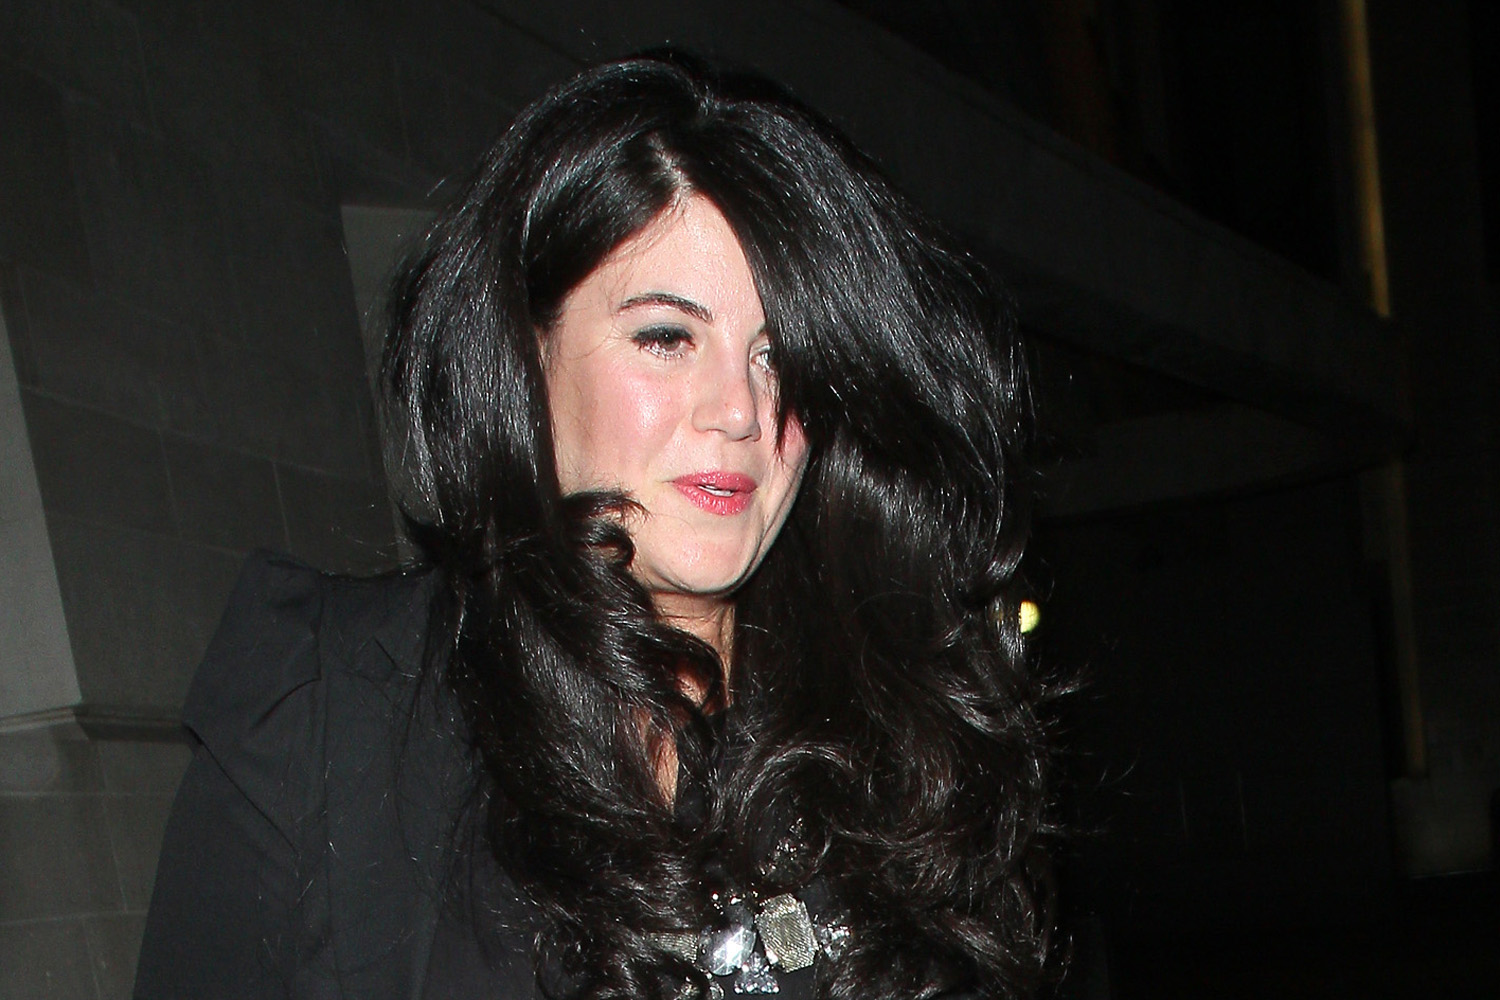 Monica Lewinsky at the Downtown Mayfair restaurant for Heather Kerzner's birthday celebration on March 19, 2013 in London. (Mark Robert Milan / FilmMagic / Getty Images)